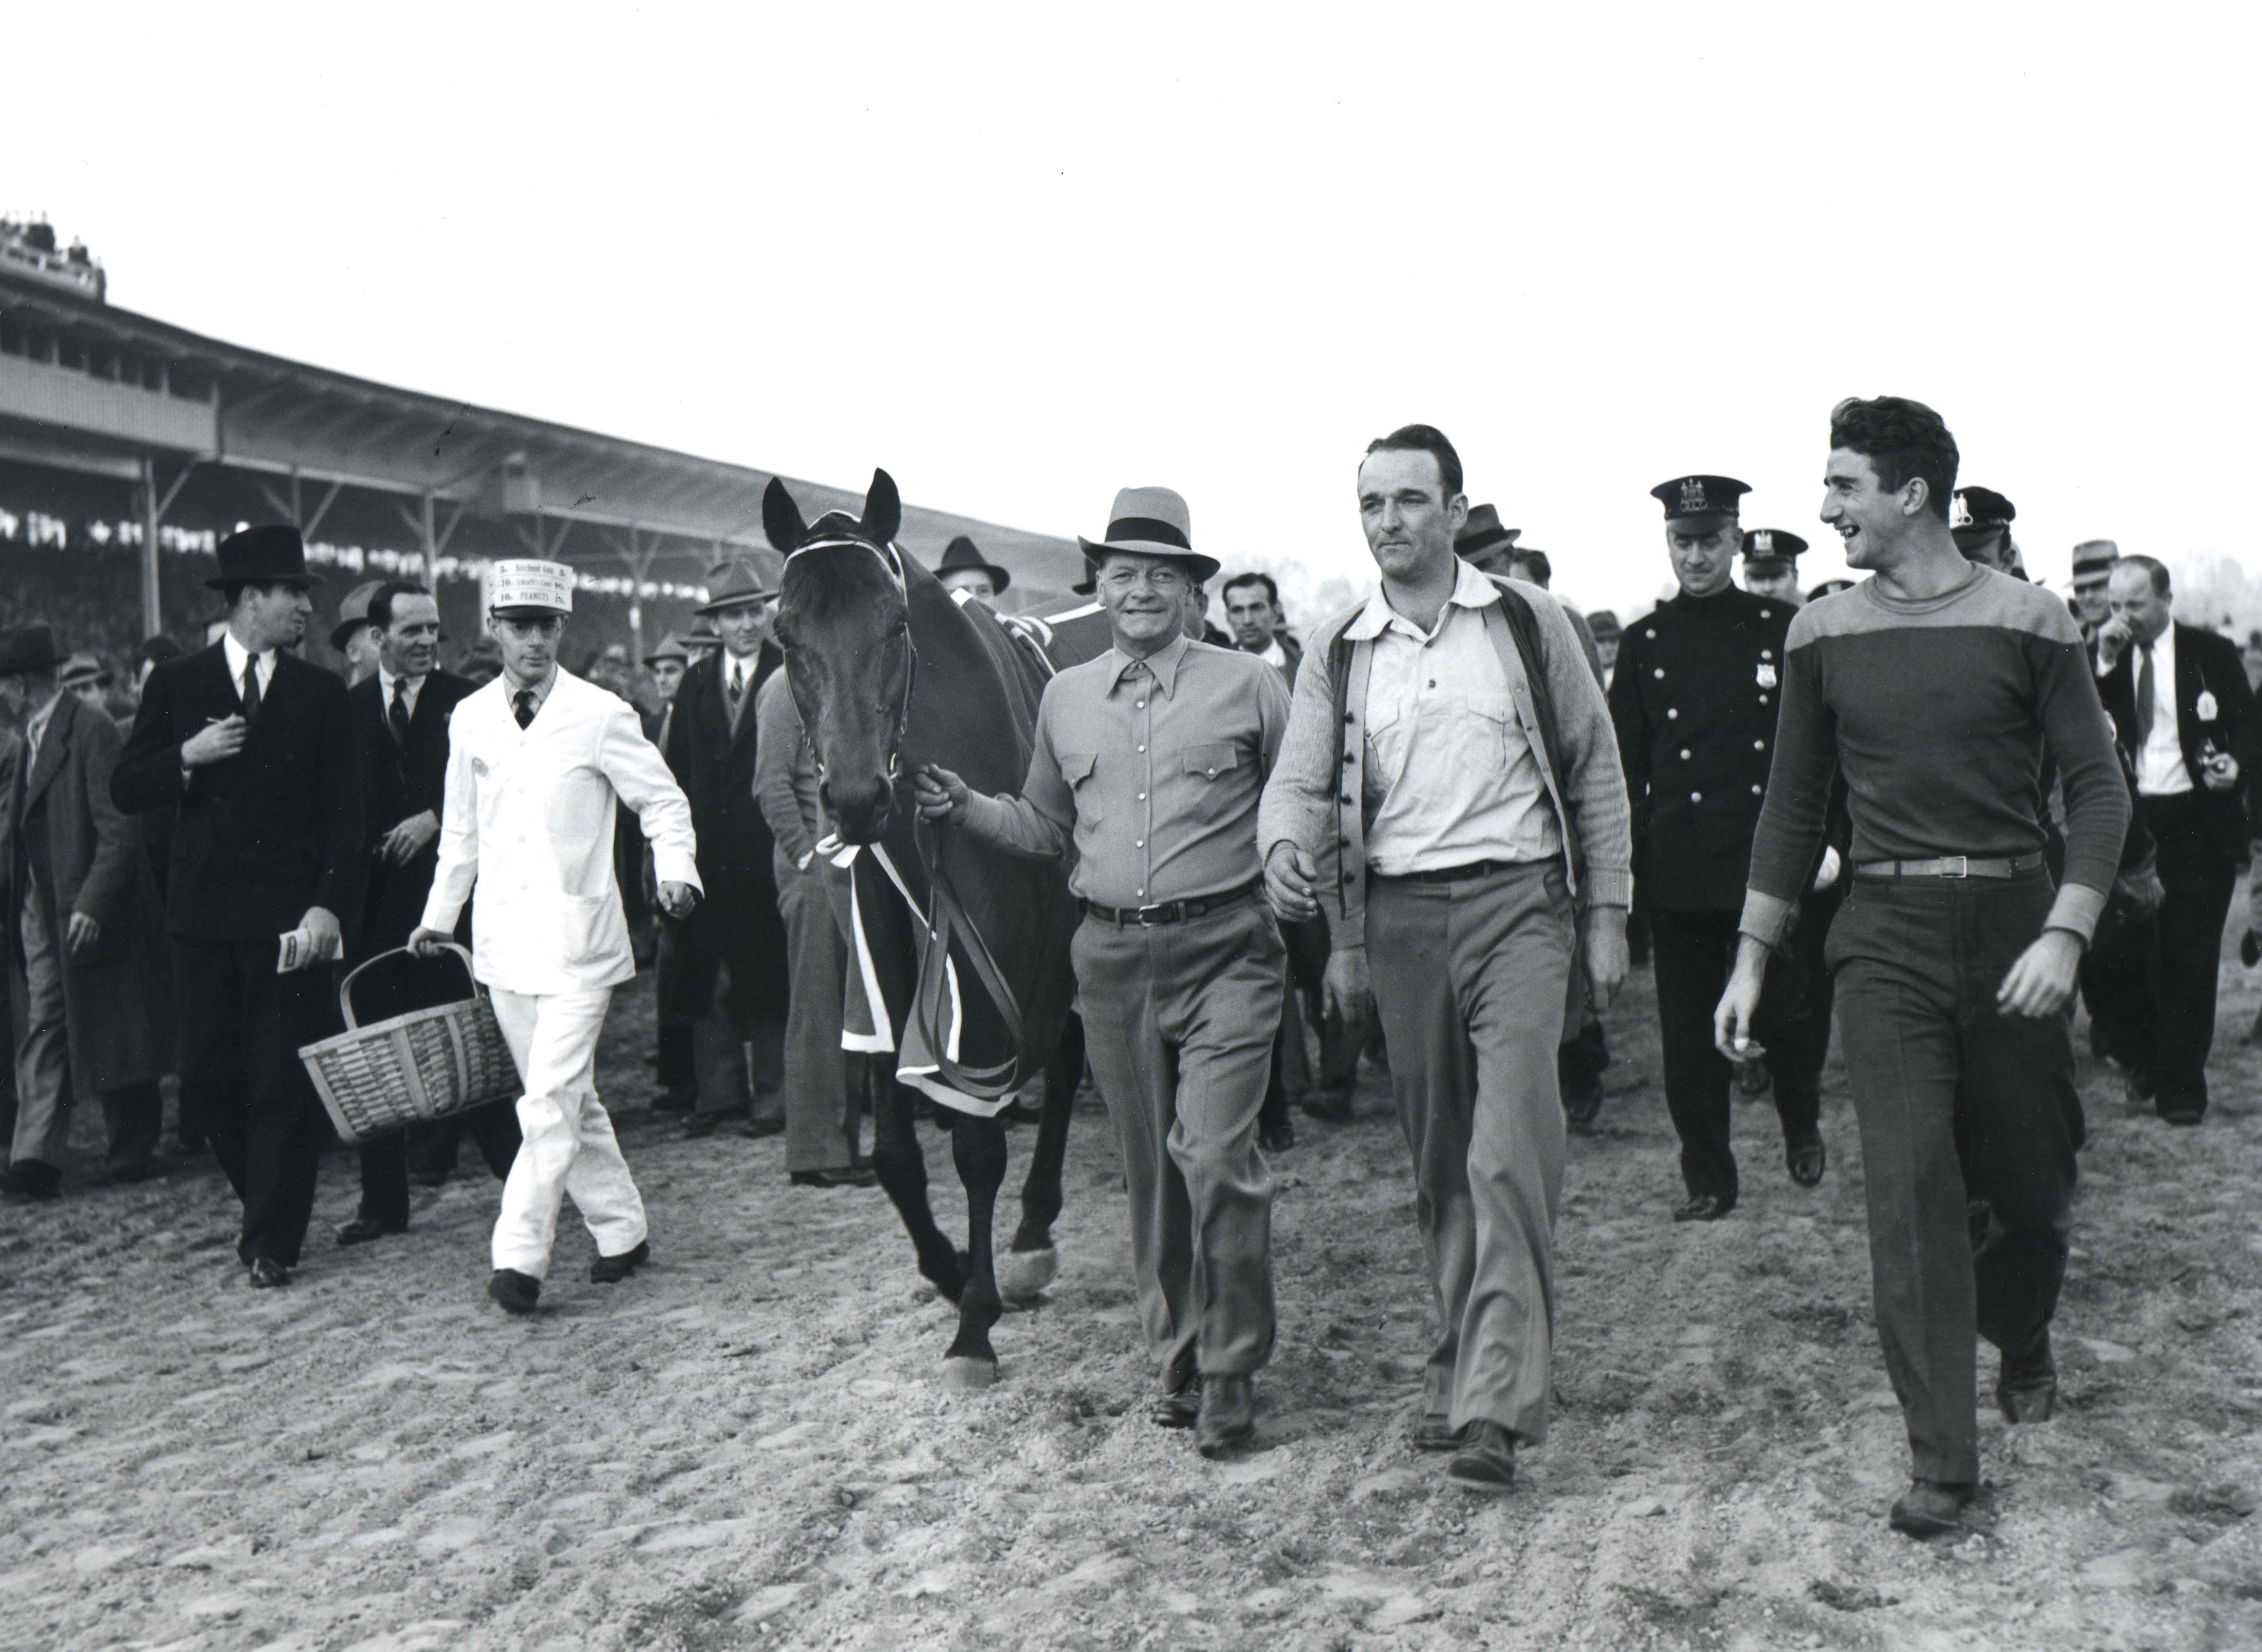 Seabiscuit (Keeneland Library Morgan Collection)